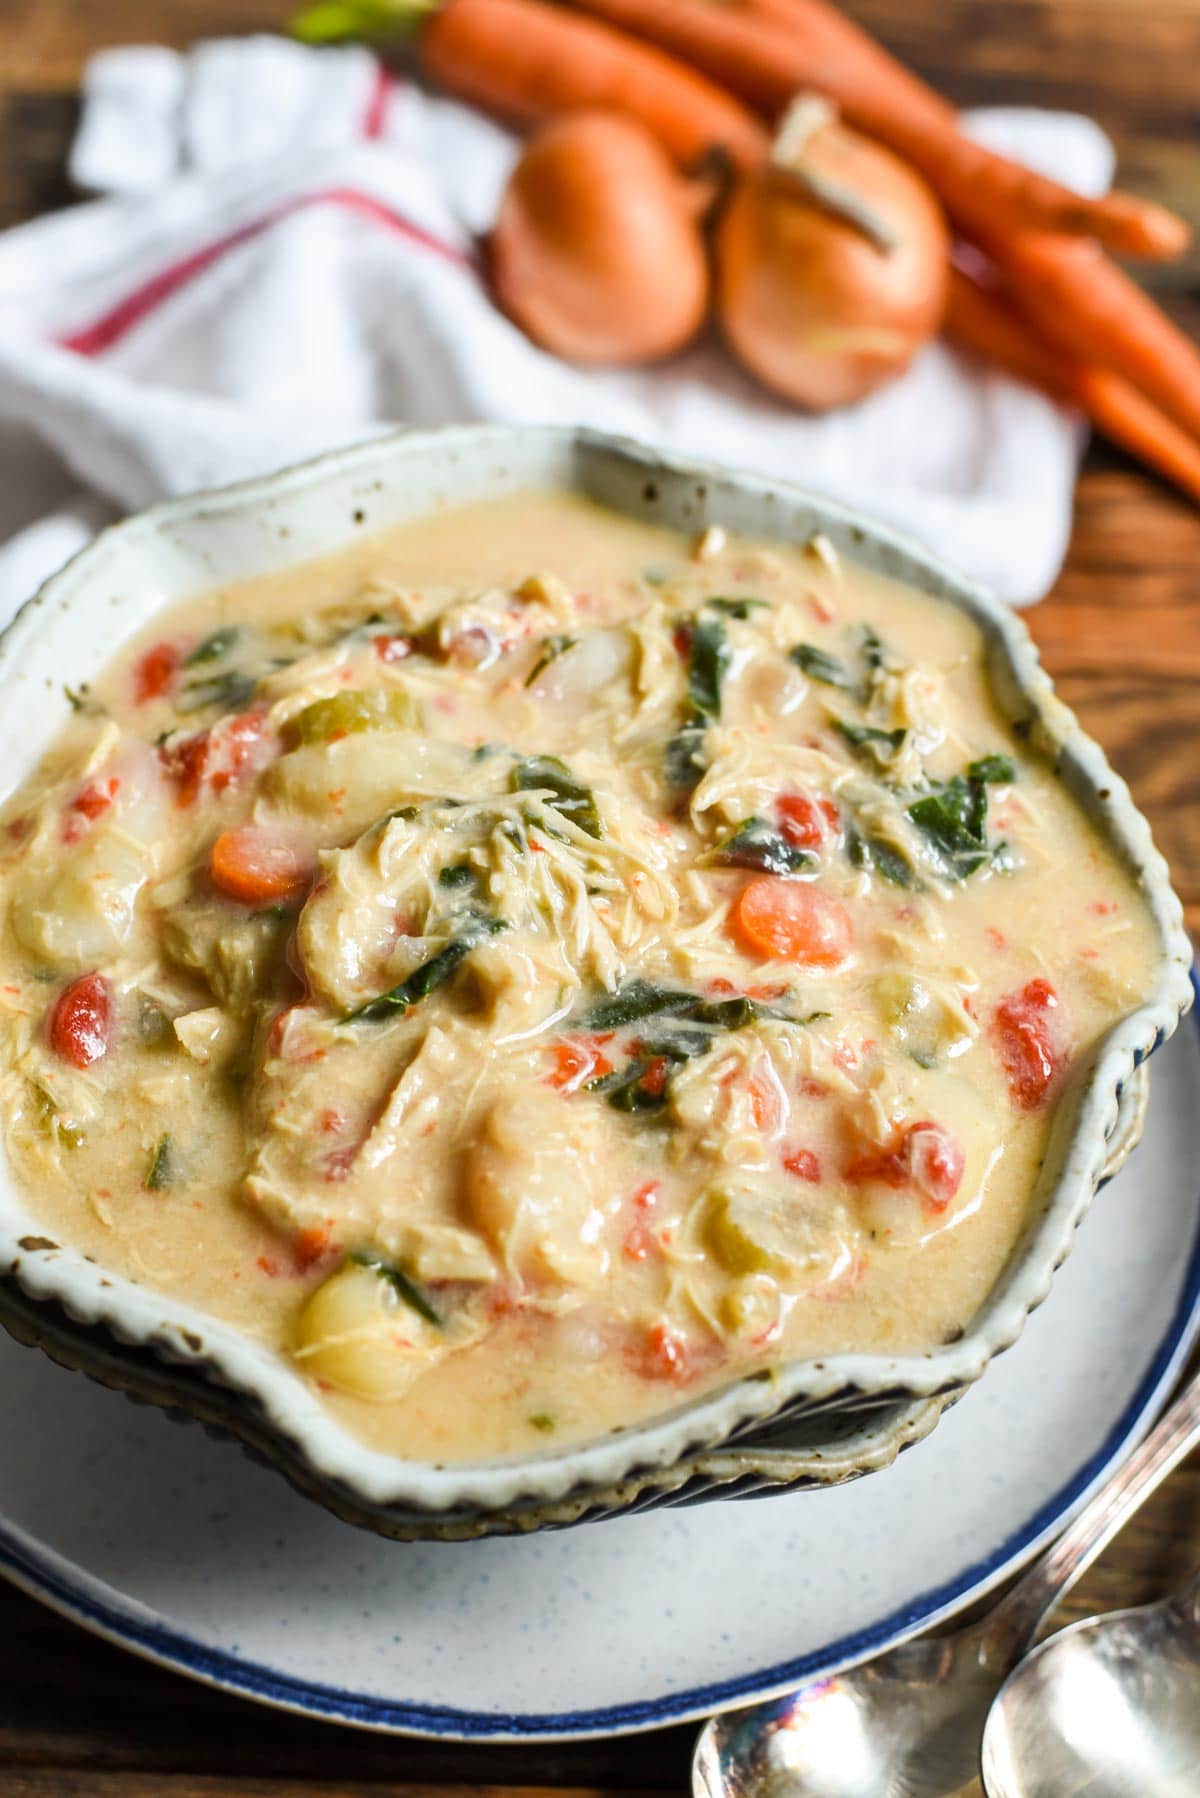 This Crock Pot Chicken Gnocchi Soup is loaded with roasted red peppers, garlic, carrots, and chard in a creamy base.